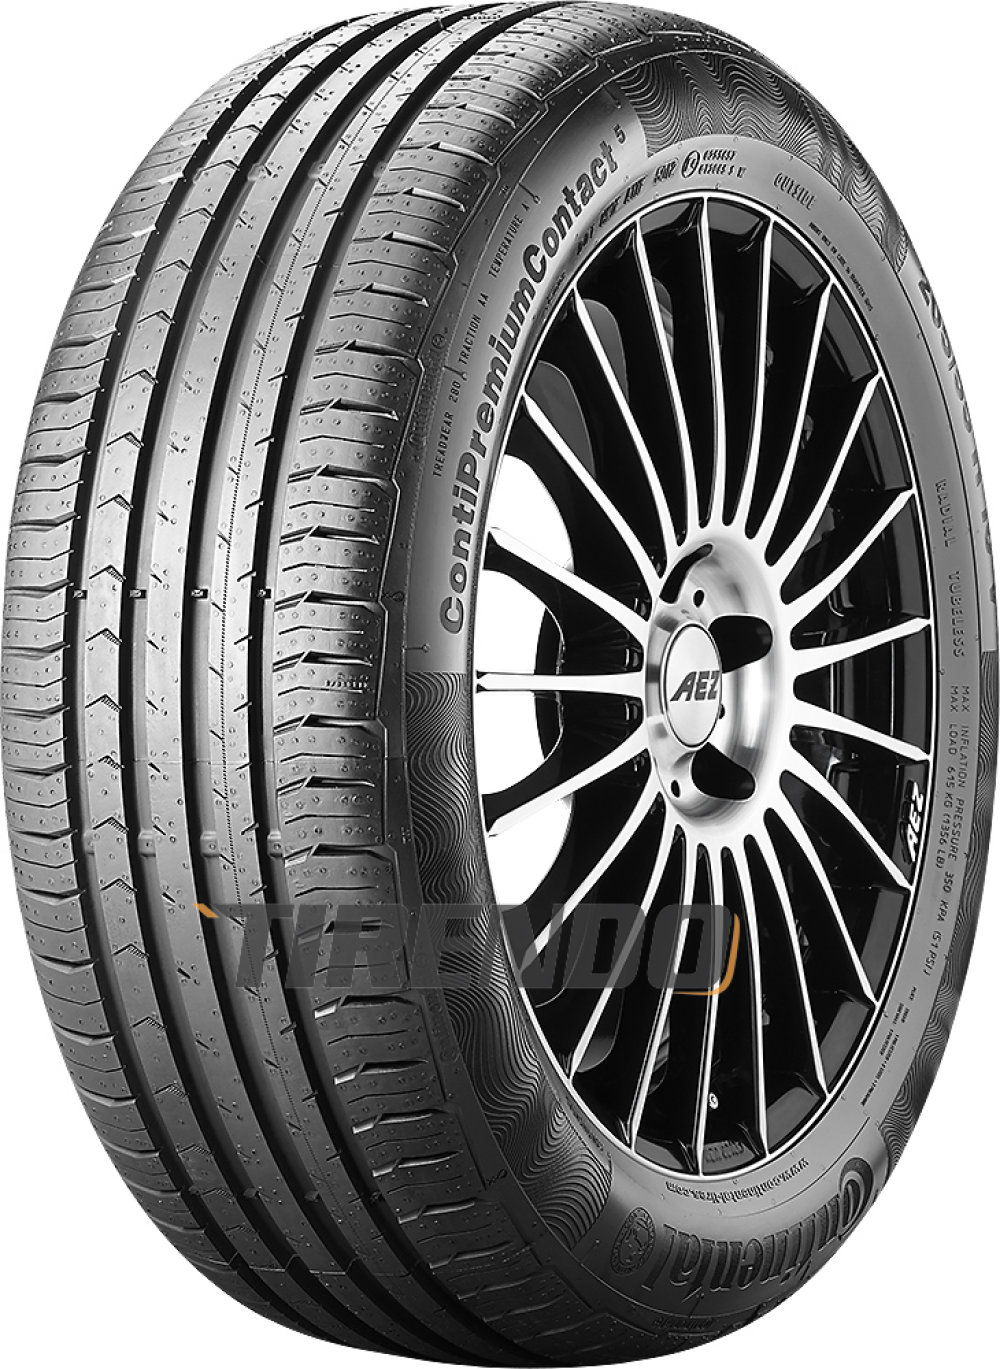 Image of Continental ContiPremiumContact 5 ( 195/55 R16 91V XL )